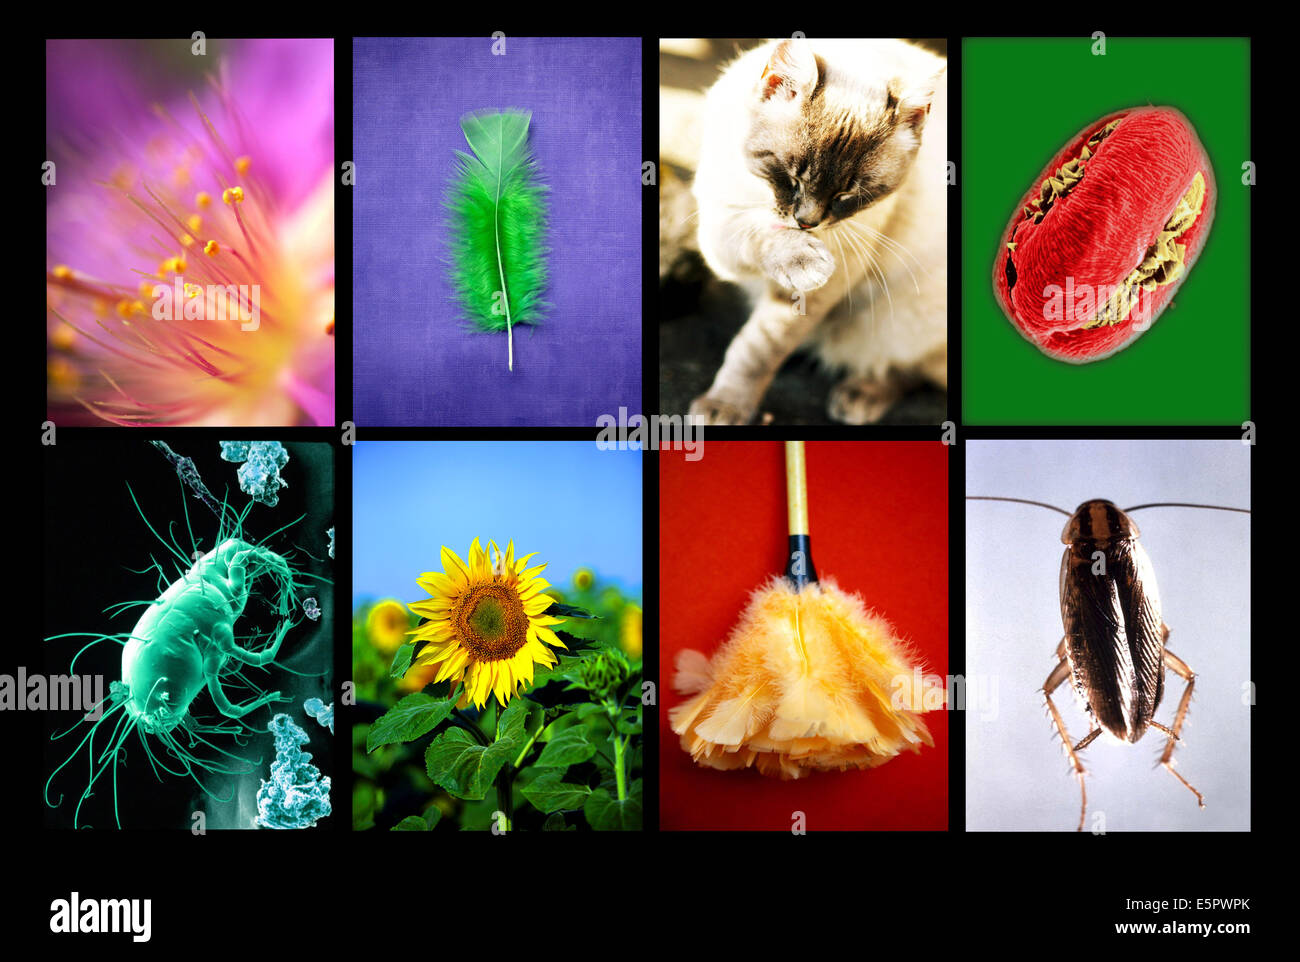 Allergens responsible for respiratory allergies. Stock Photo